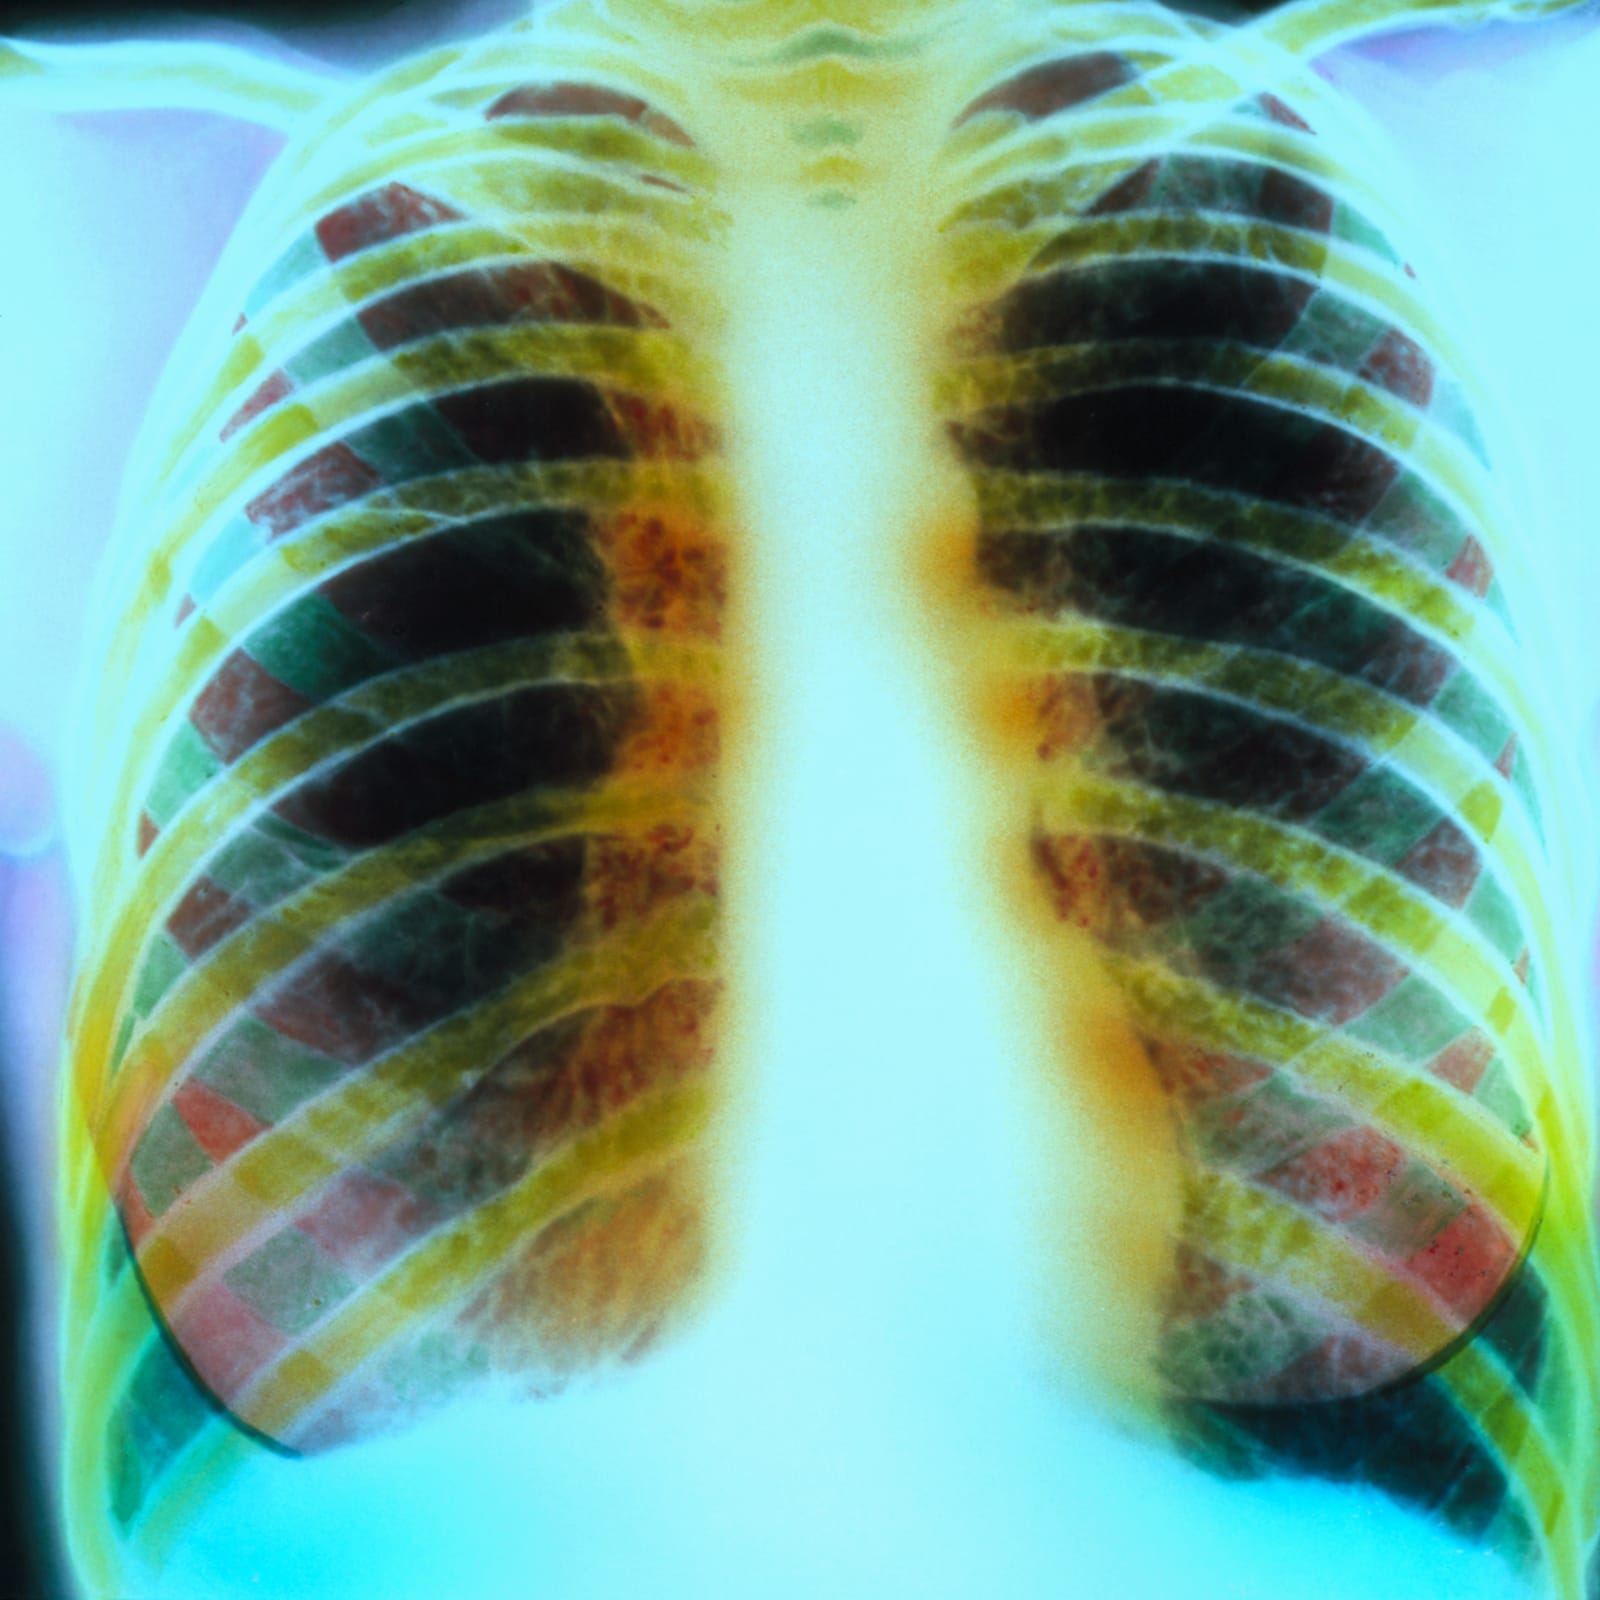 Chest X-ray of lungs with cystic fibrosis